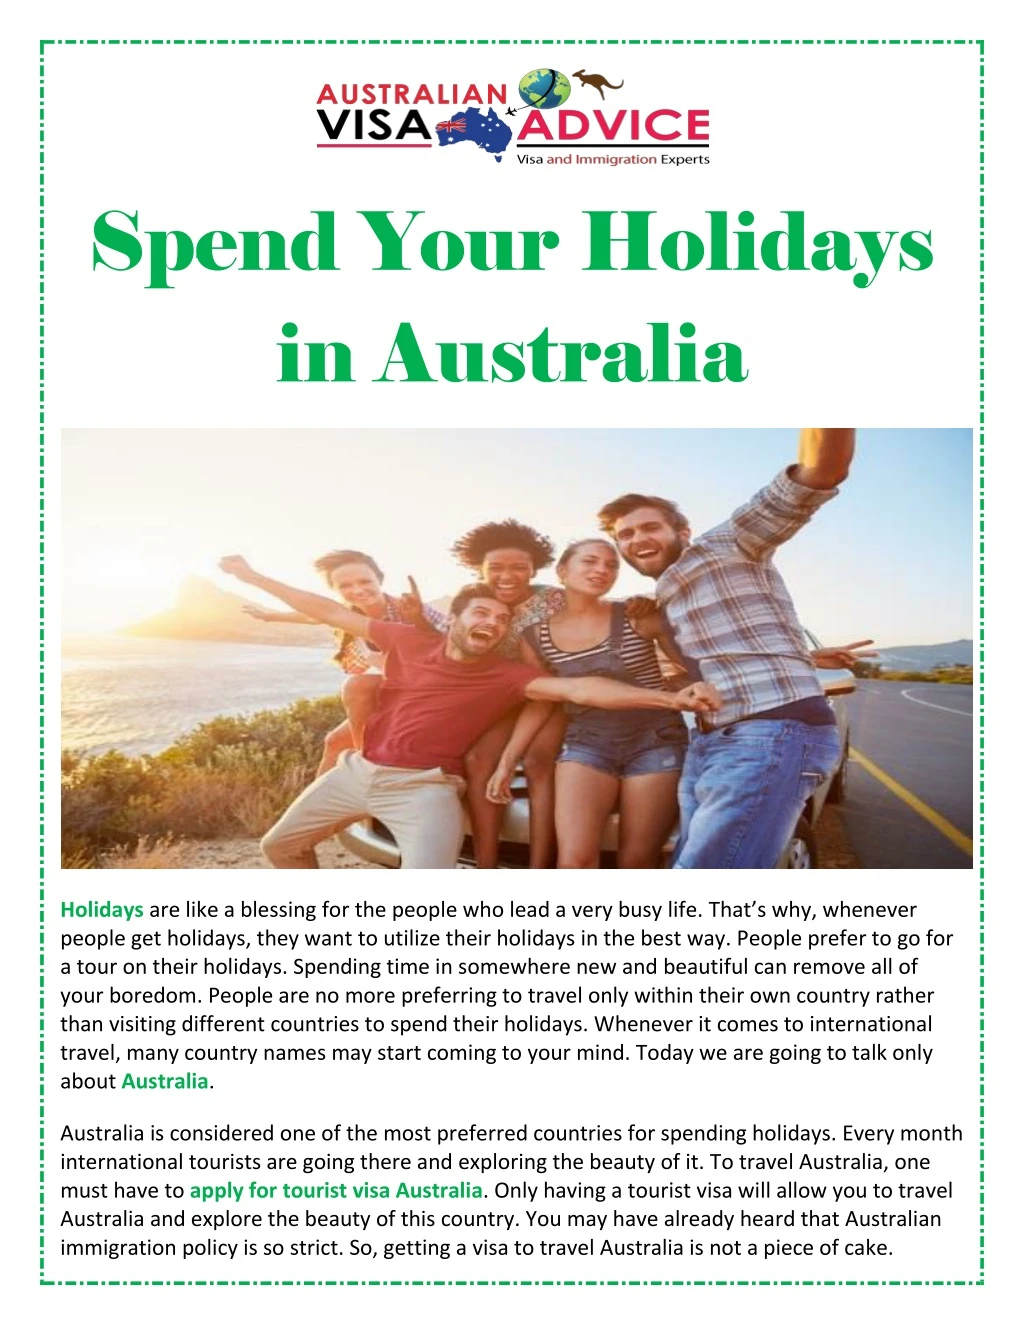 spend your holidays in australia